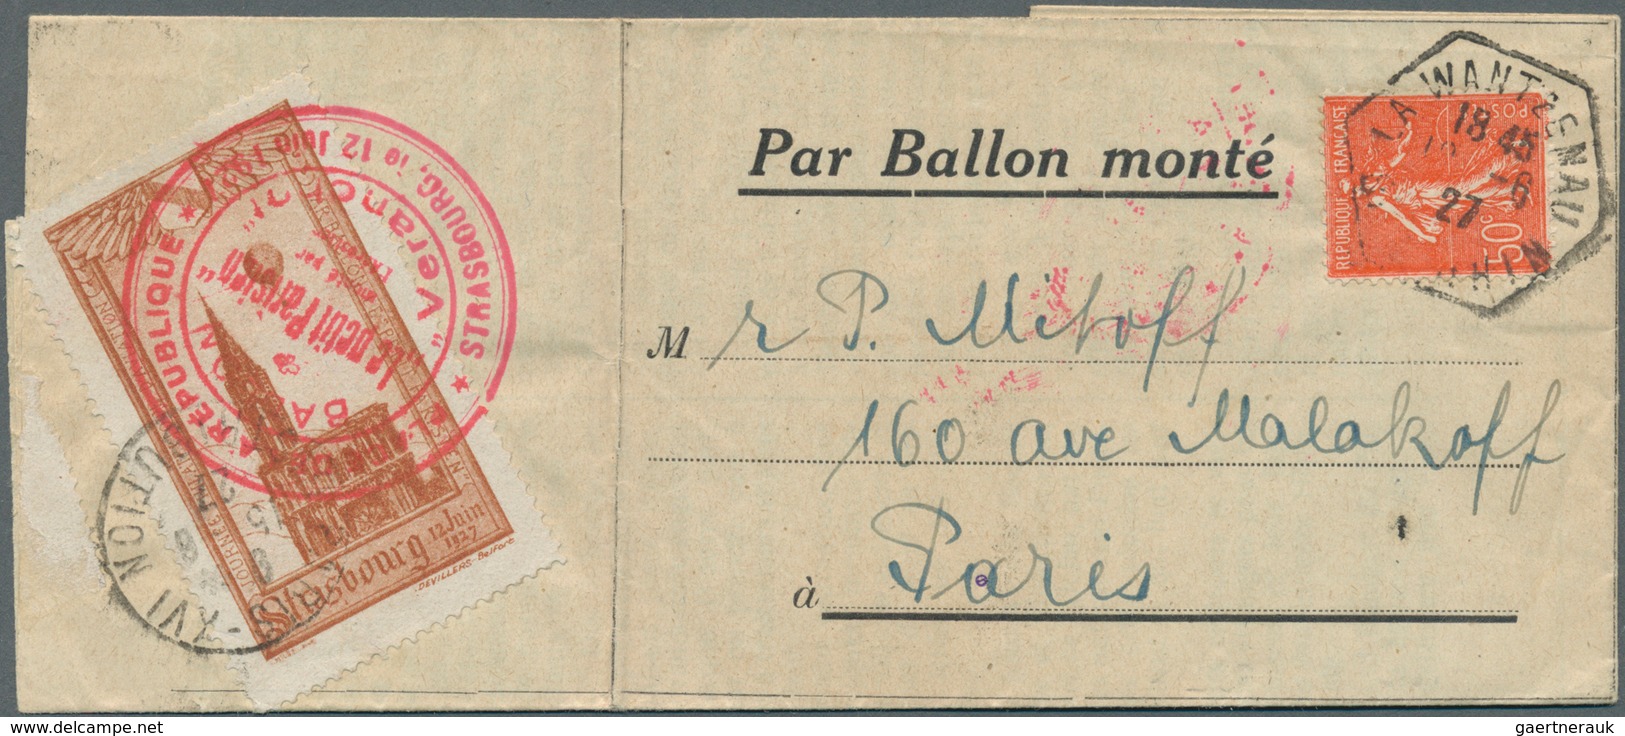 Ballonpost: 1927/1955, lot of 26 balloon mail covers/cards, mainly Europe incl. Germany, e.g. 1927 S